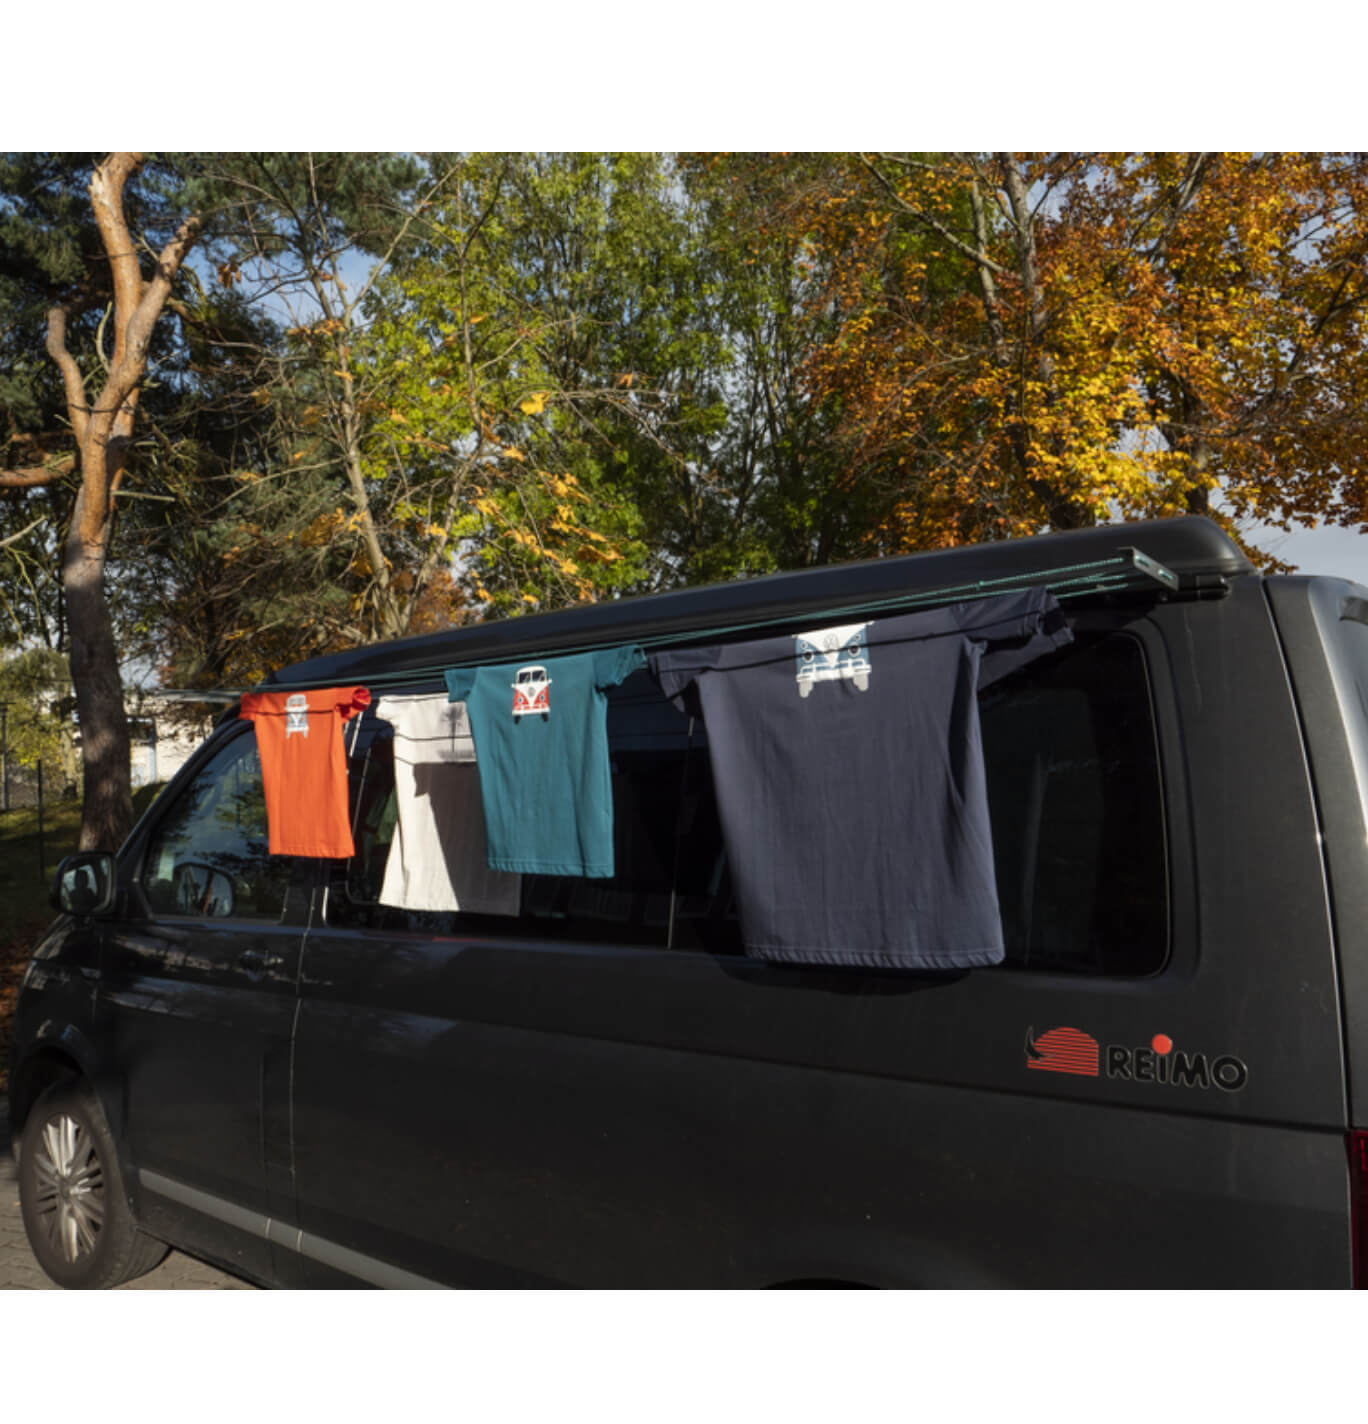 Reimo Washing / Clothes Line for Reimo MultiRail – The Camperco Shop